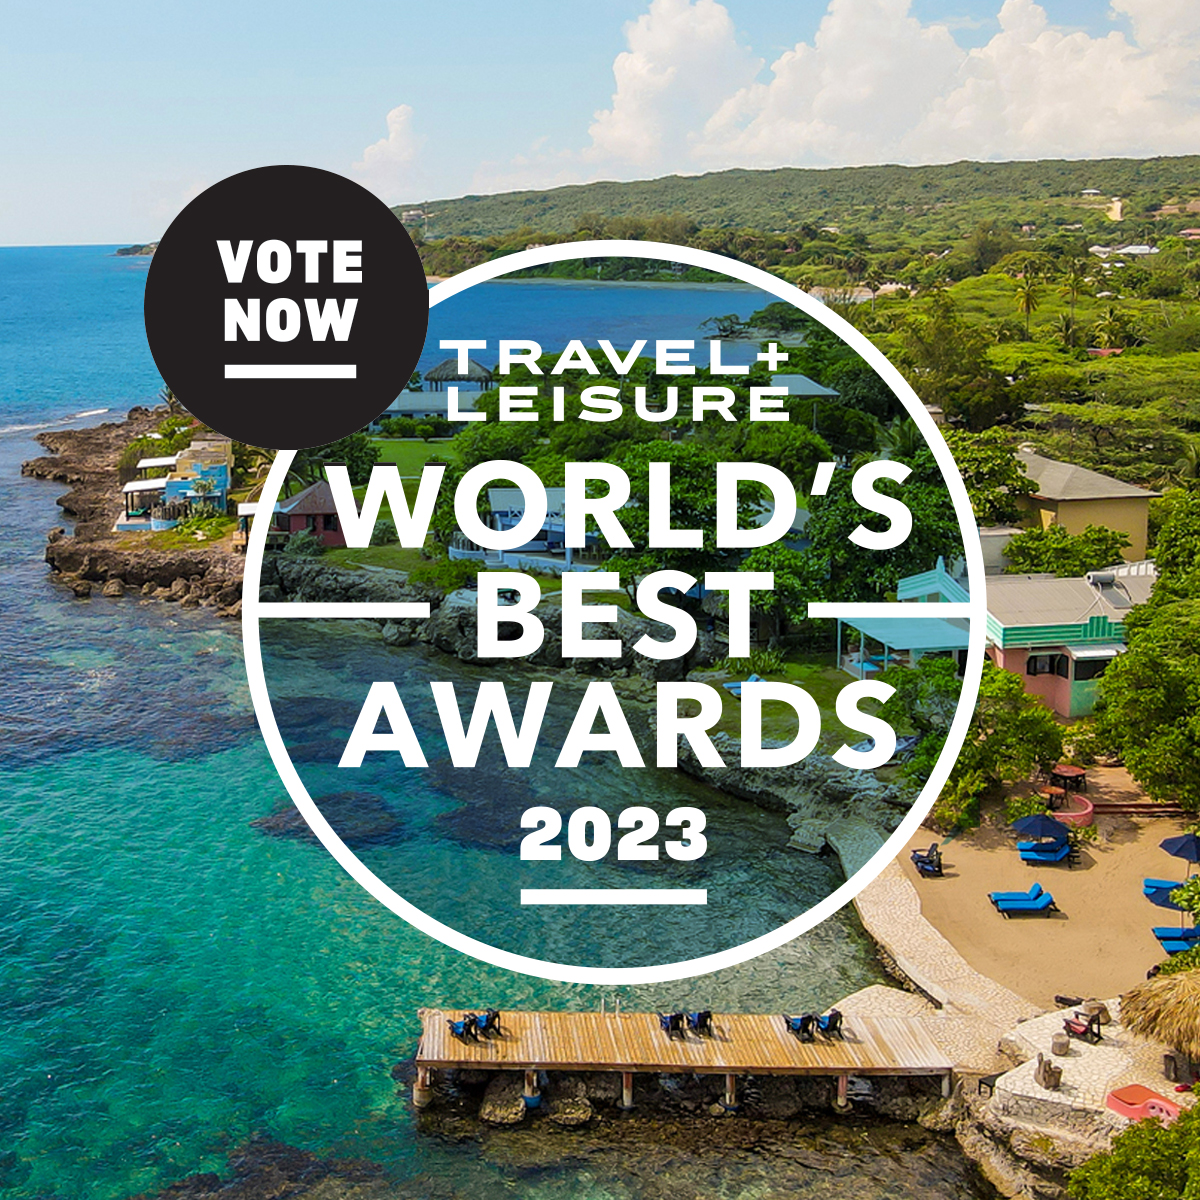 Vote for Jakes in Travel + Leisure's 2023 World’s Best Awards Survey